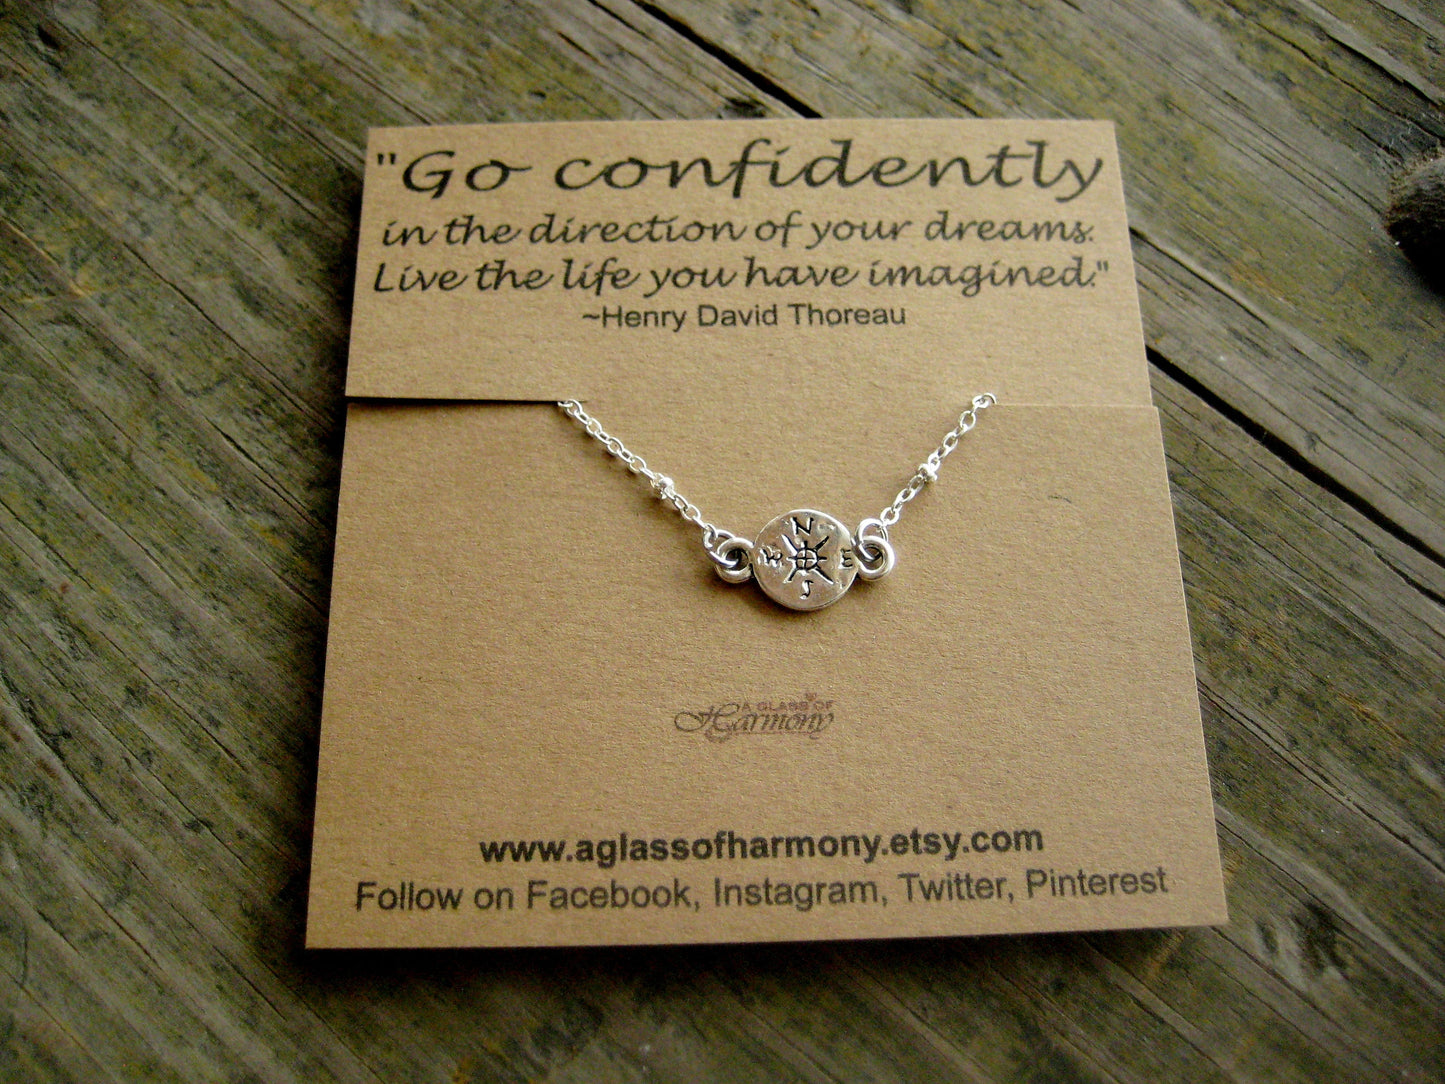 GRADUATION GIFT - Graduation Necklace, Graduation Jewelry, Go Confidently, Graduation gift for her, Compass Jewelry